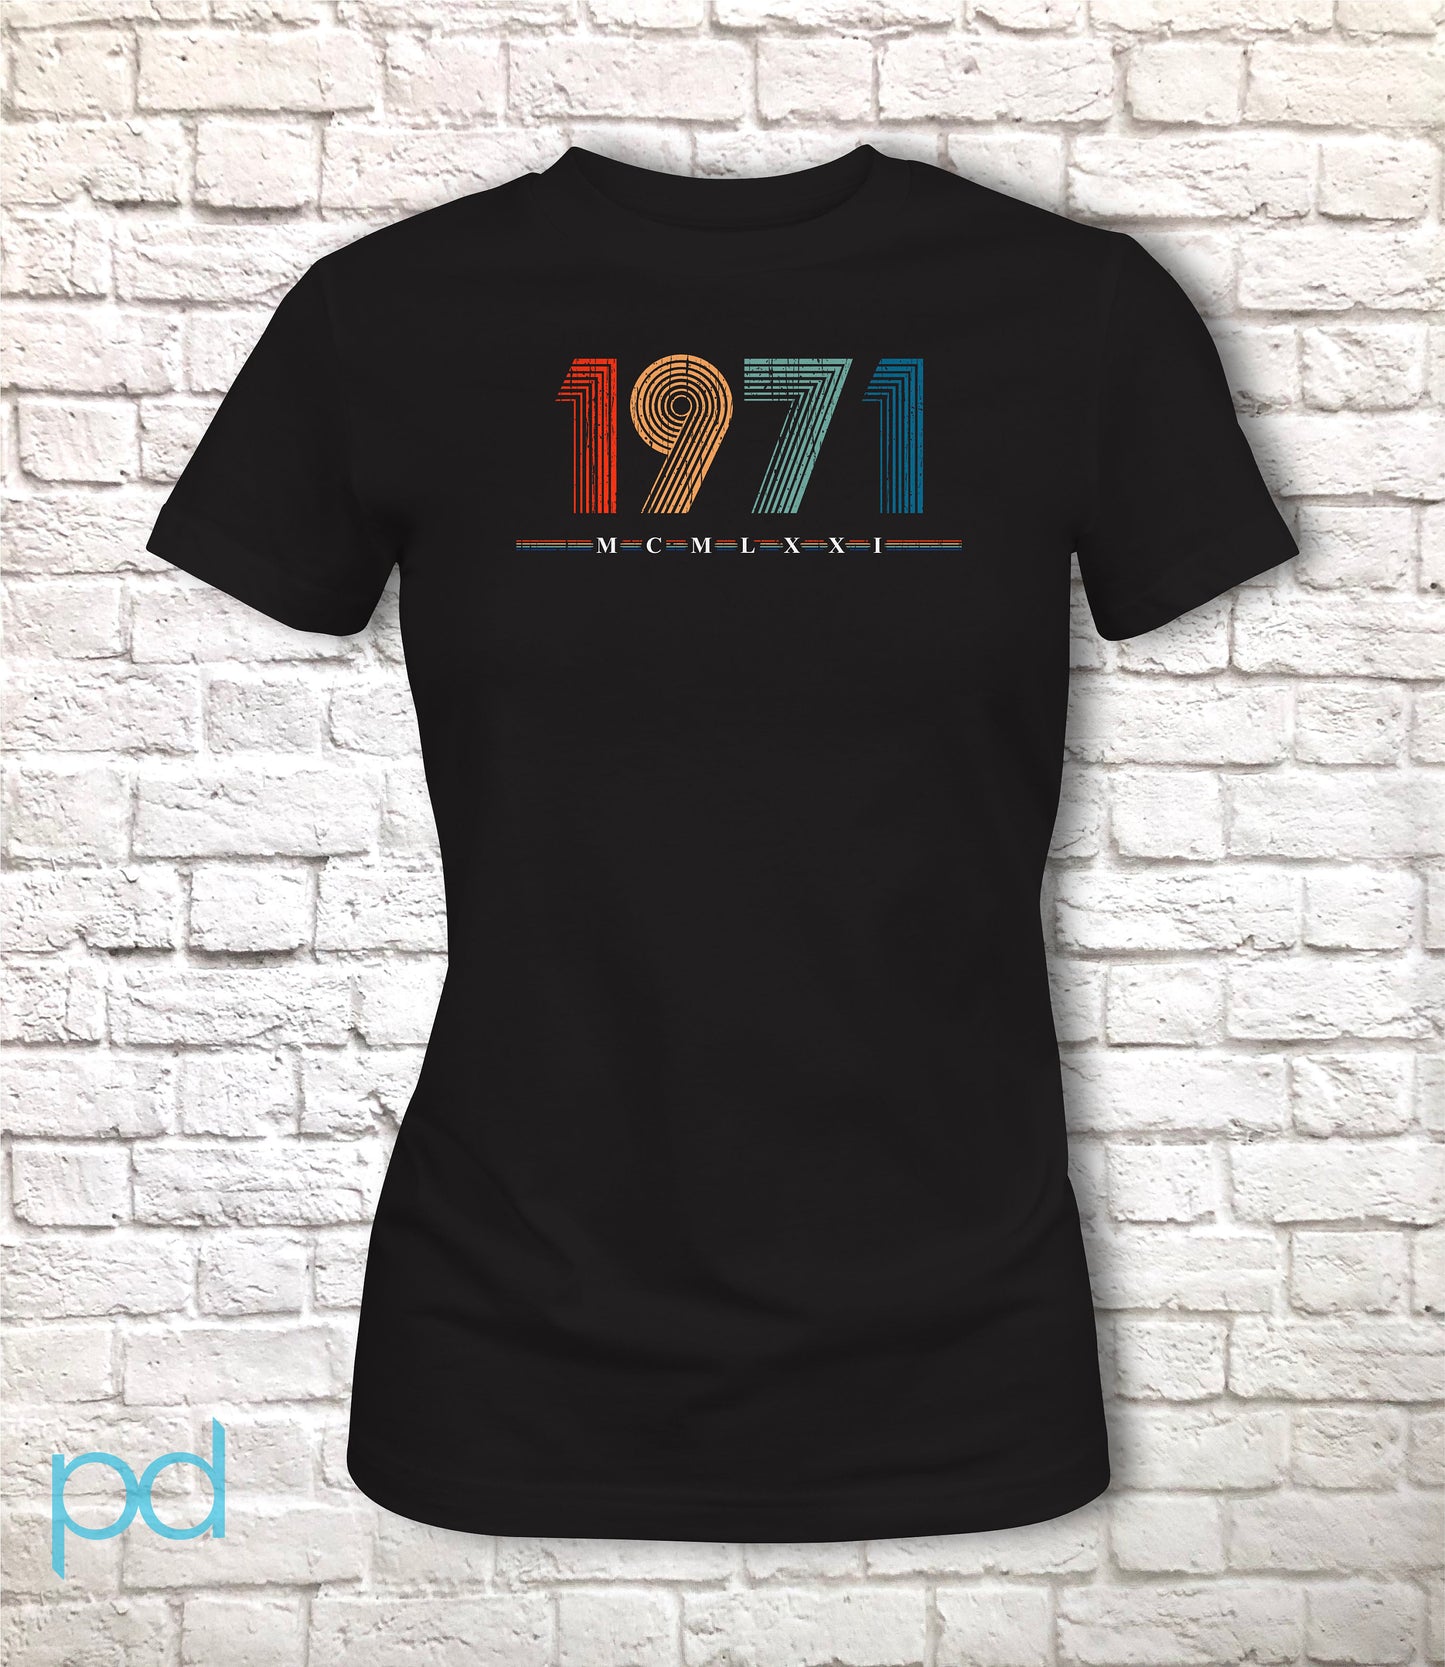 1971 Women's T Shirt, 51st Birthday Gift Ladies T-Shirt in Retro & Vintage 70s style, MCMLXXI Fiftieth Bday Fitted Fit Tee Shirt Top